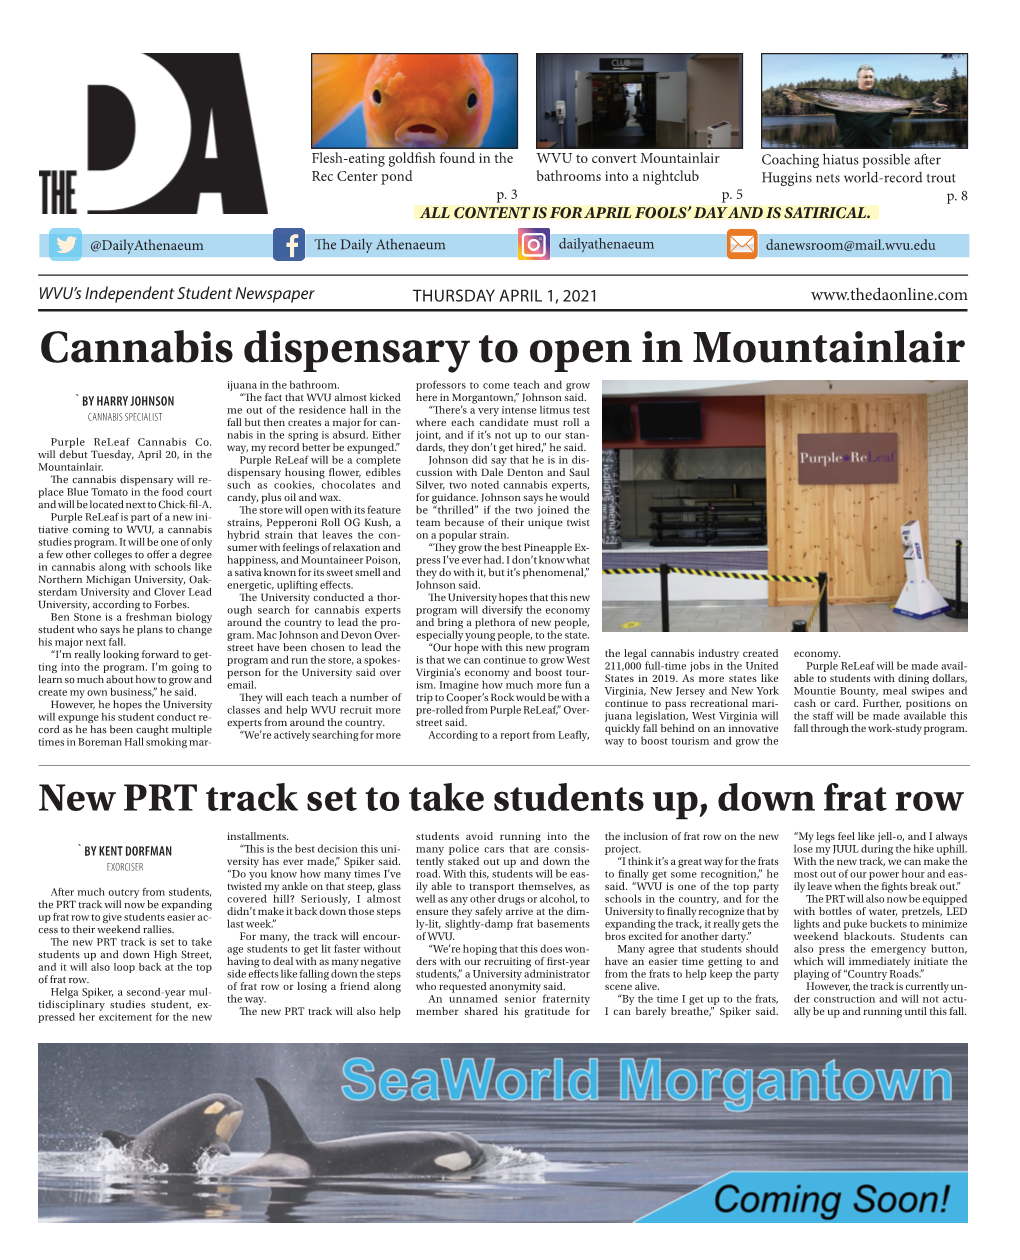 Cannabis Dispensary to Open in Mountainlair